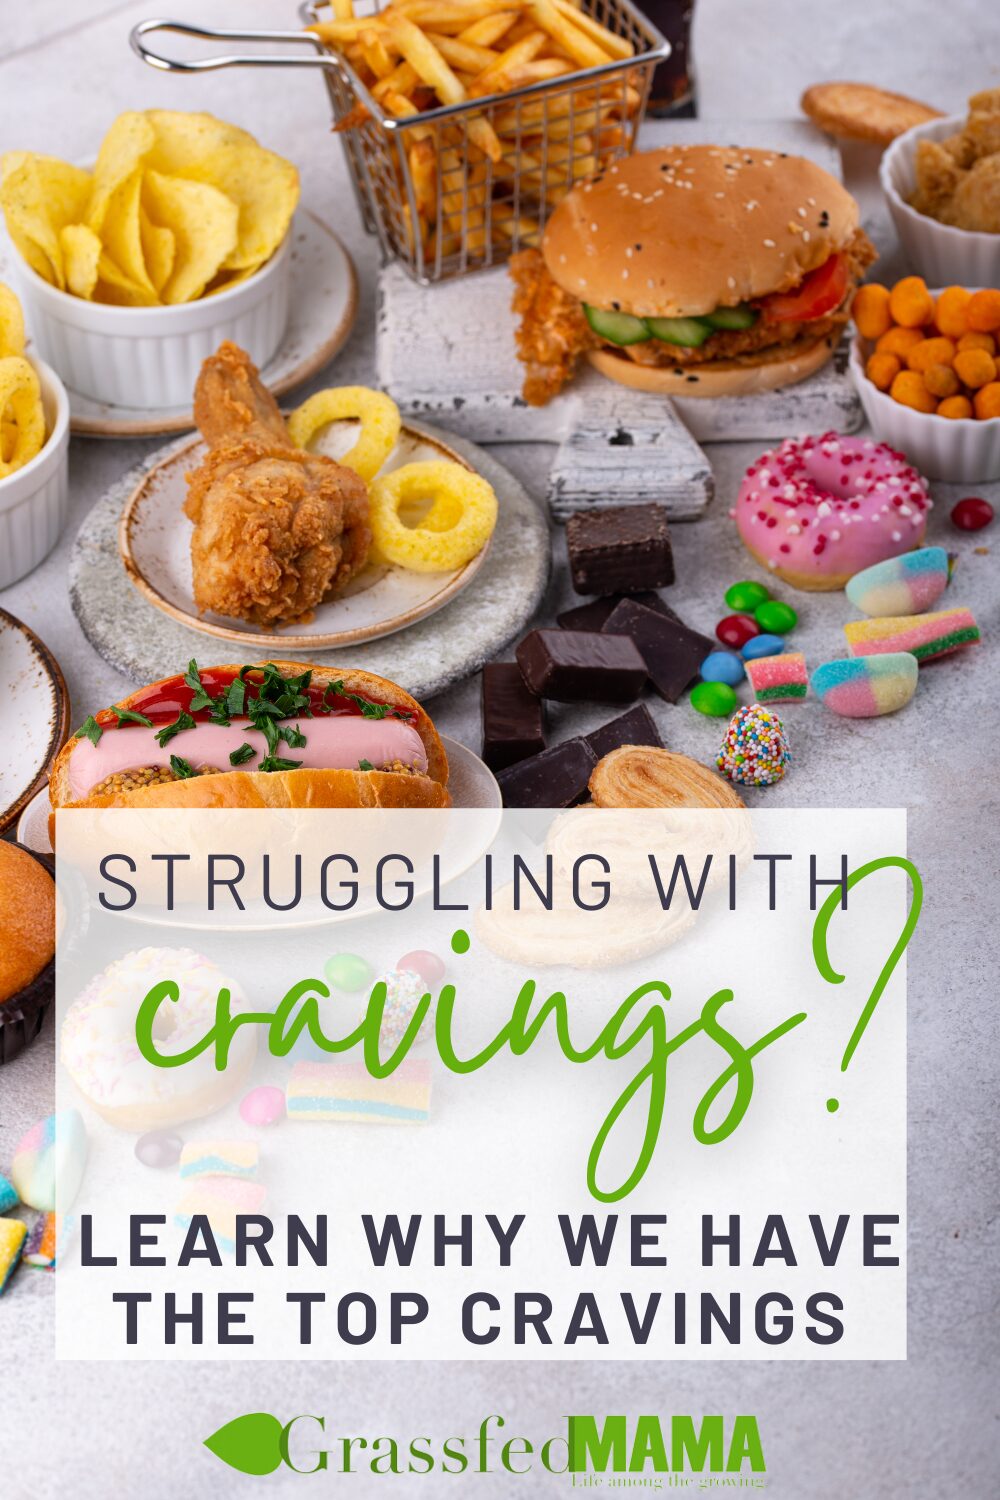 The Top Cravings and Why we Have them